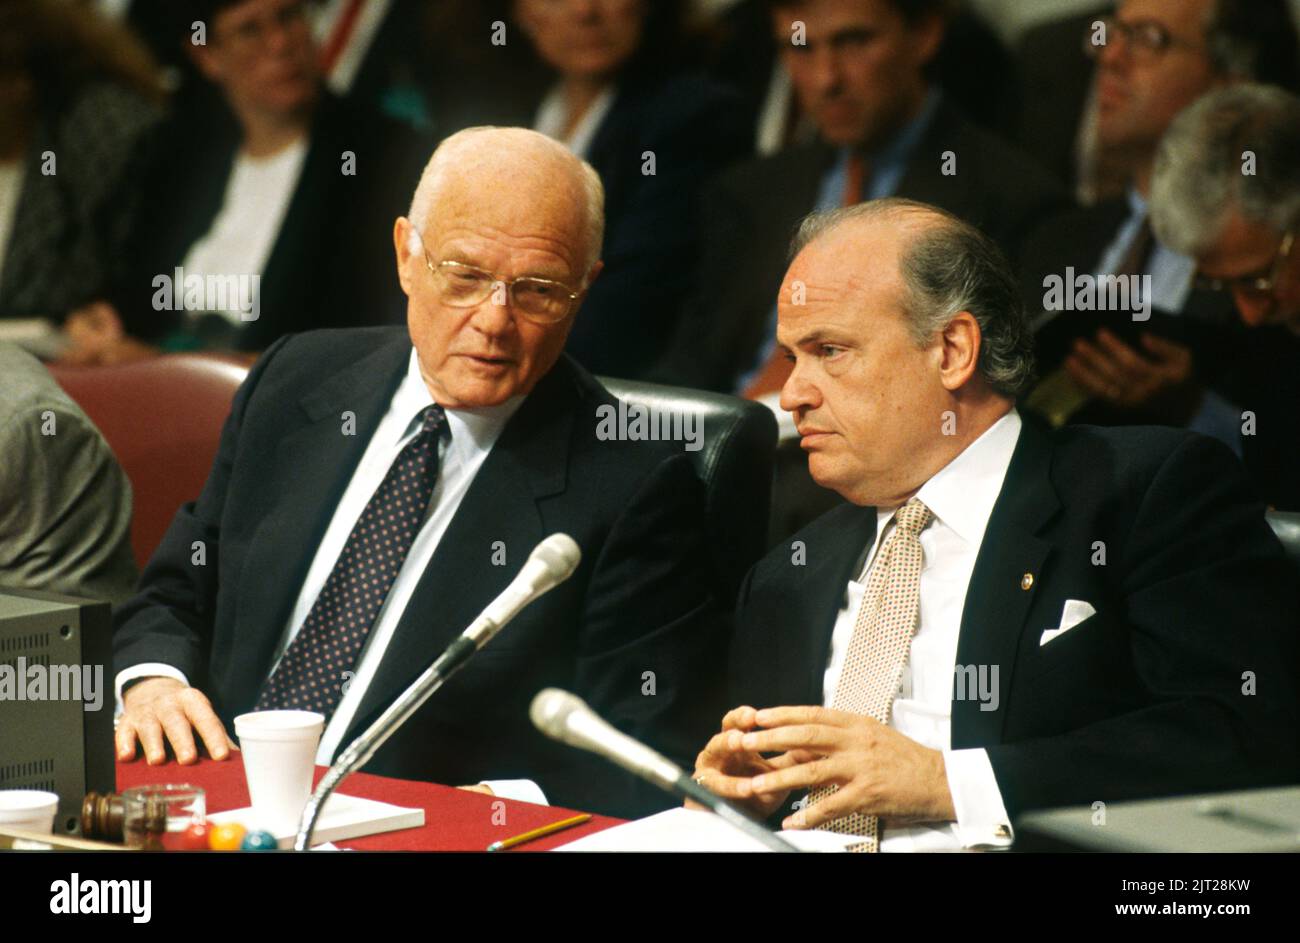 Senator Fred Thompson of Tennessee, chairman of the Senate Governmental Affairs Committee, right, and Ranking Minority member Senator John Glenn of Ohio, confer during hearing into allegations of illegal and improper fundraising practices by the Democrats during the 1996 presidential election, September 7, 1997 in Washington, D.C. Stock Photo